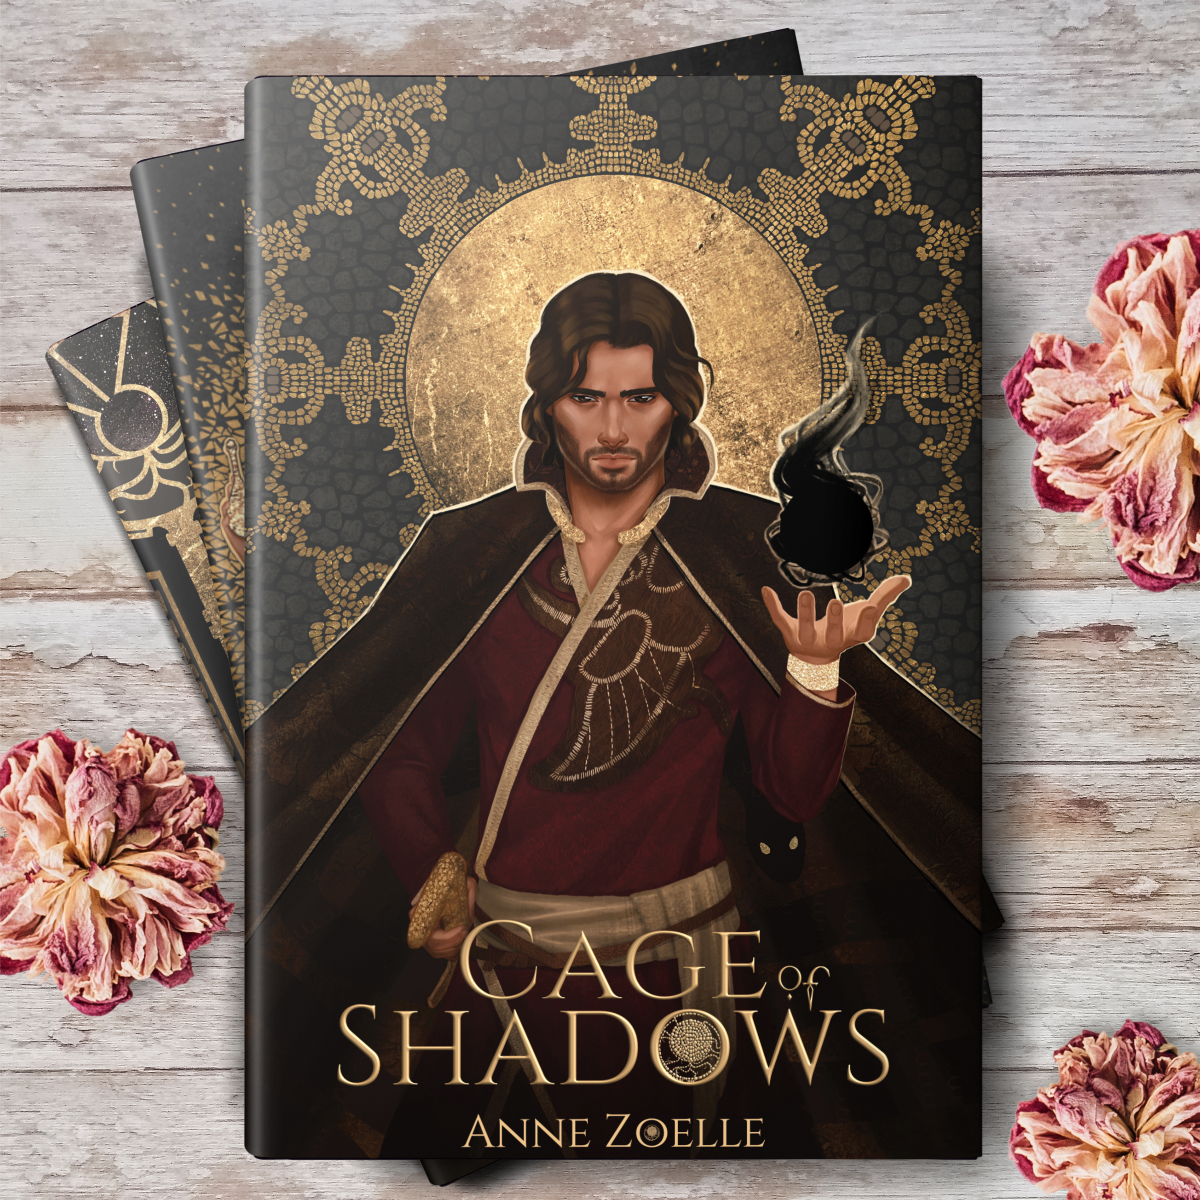 Cage of Shadows book cover on a stack of books